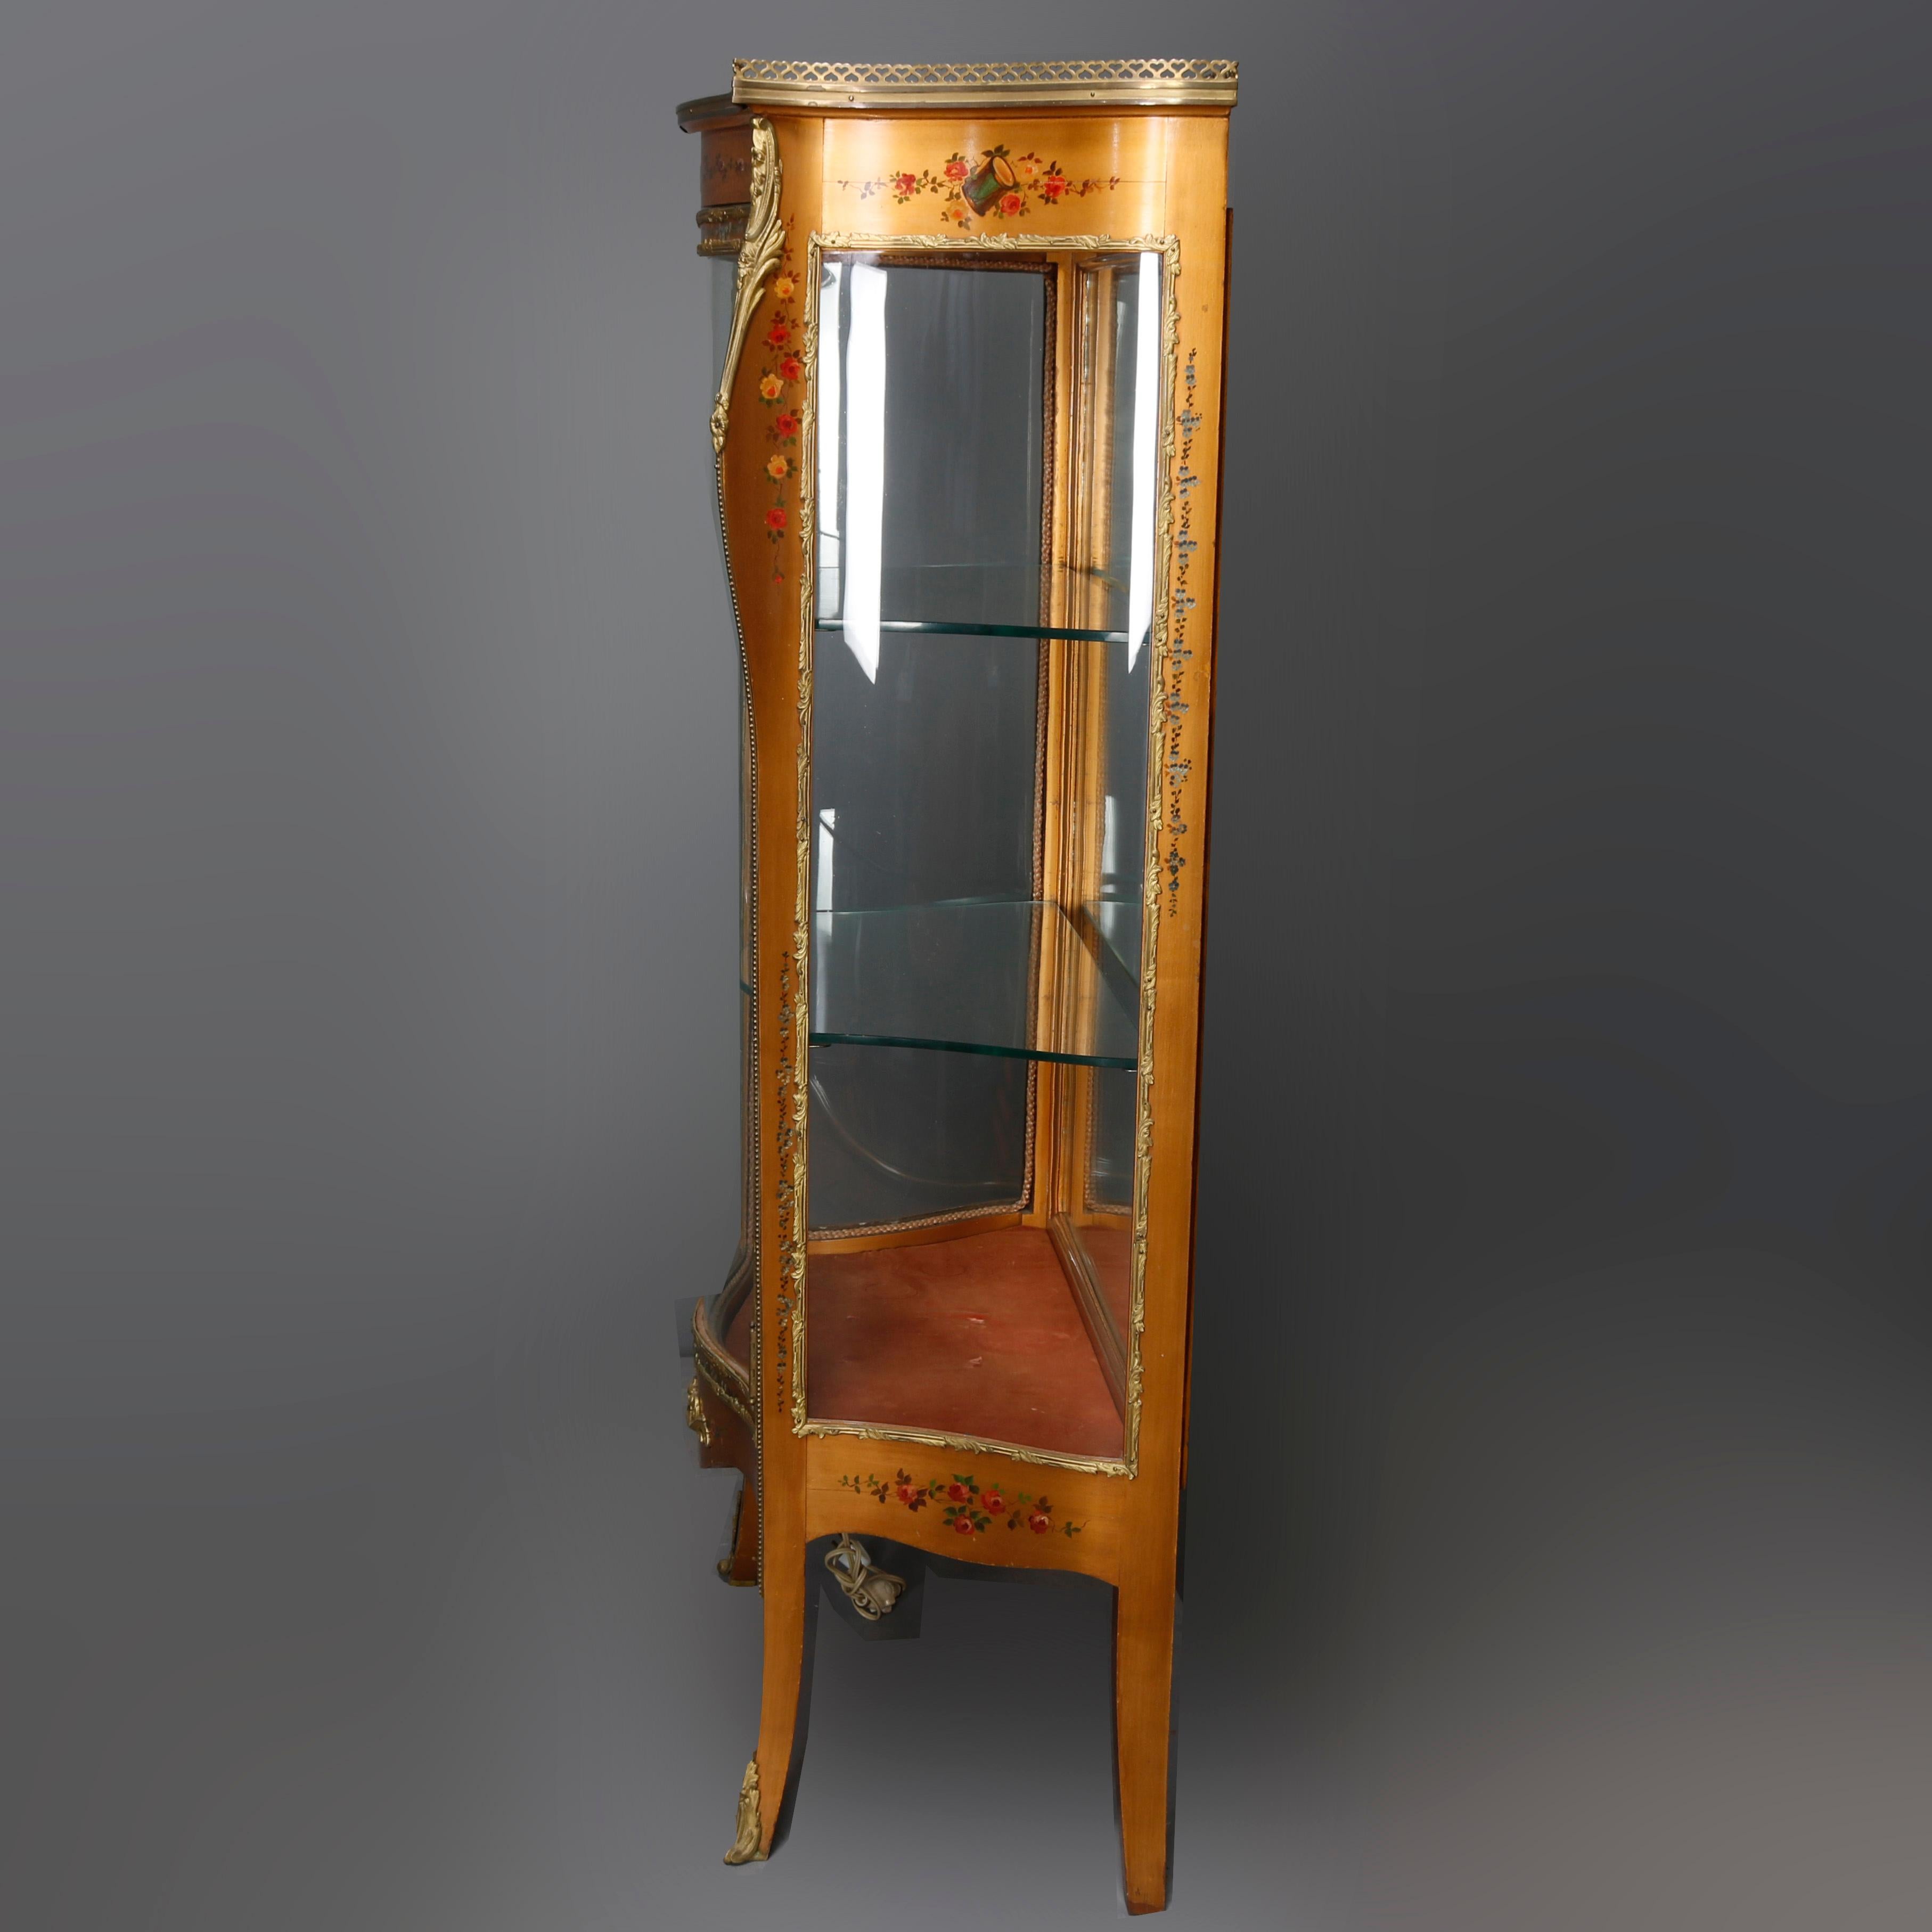 An antique French Louis XIV style vitrine curio cabinet offers pierced bronze gallery surmounting floral paint decorated cherry case having concave bowed glass side panels and convex glass door opening to lighted and mirrored interior with glass